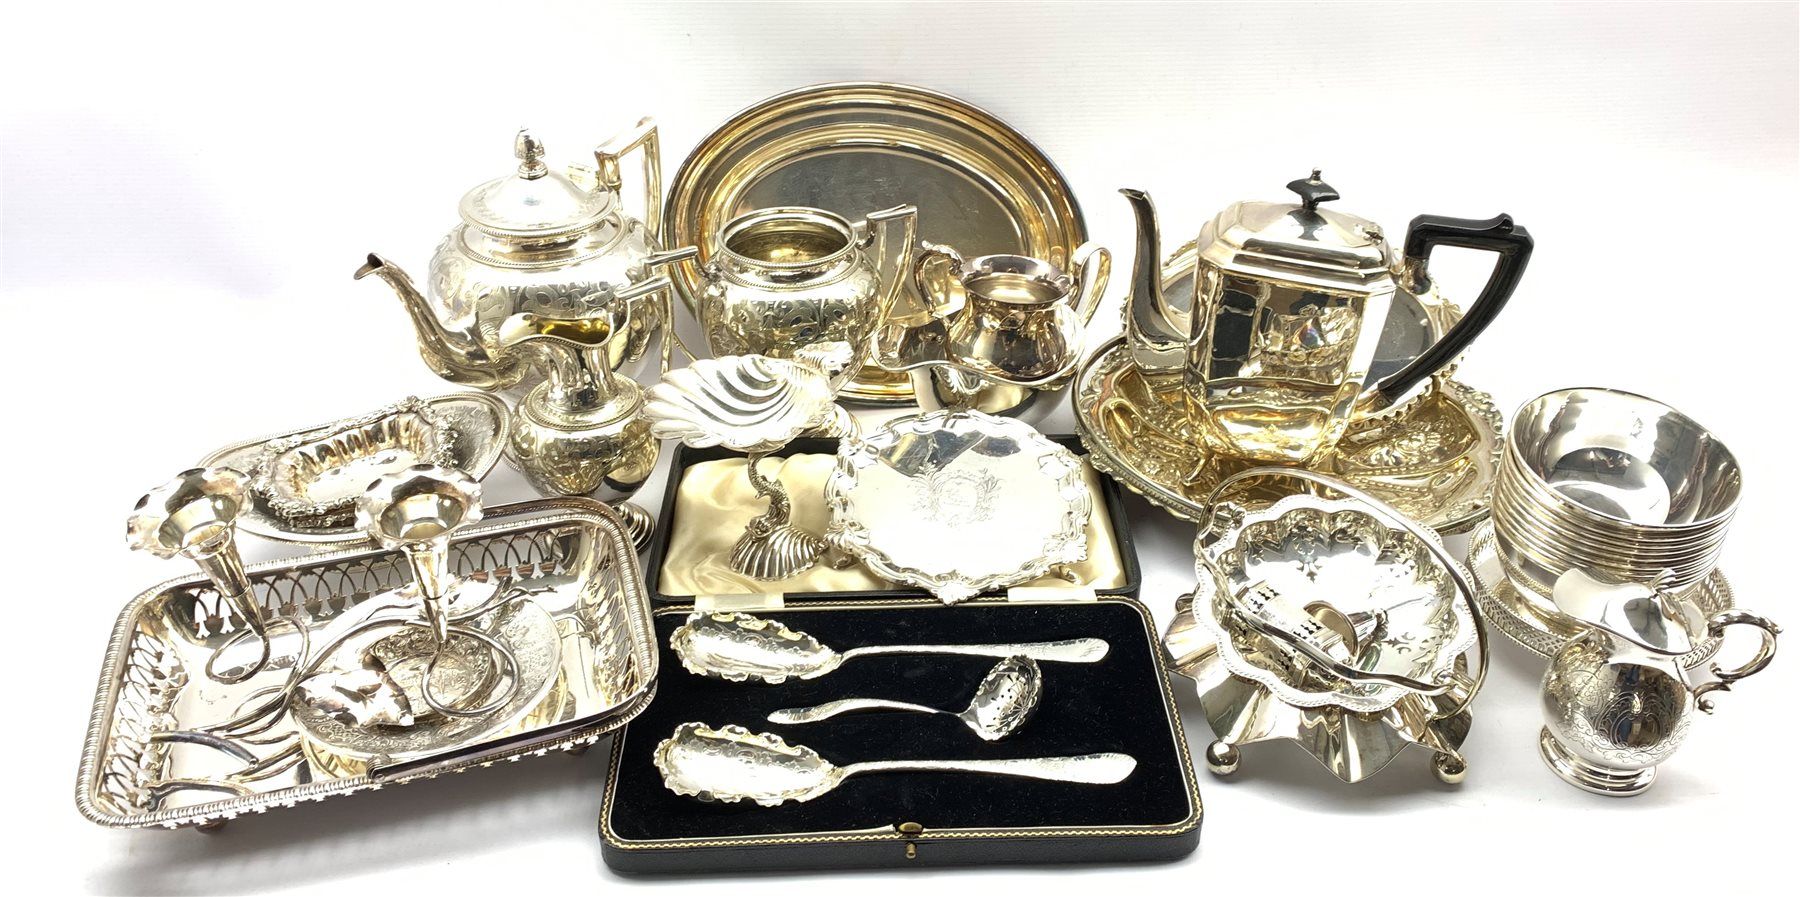 A cased early 20th century Dessert serving set comprising two foliate design spoons and sifter, all